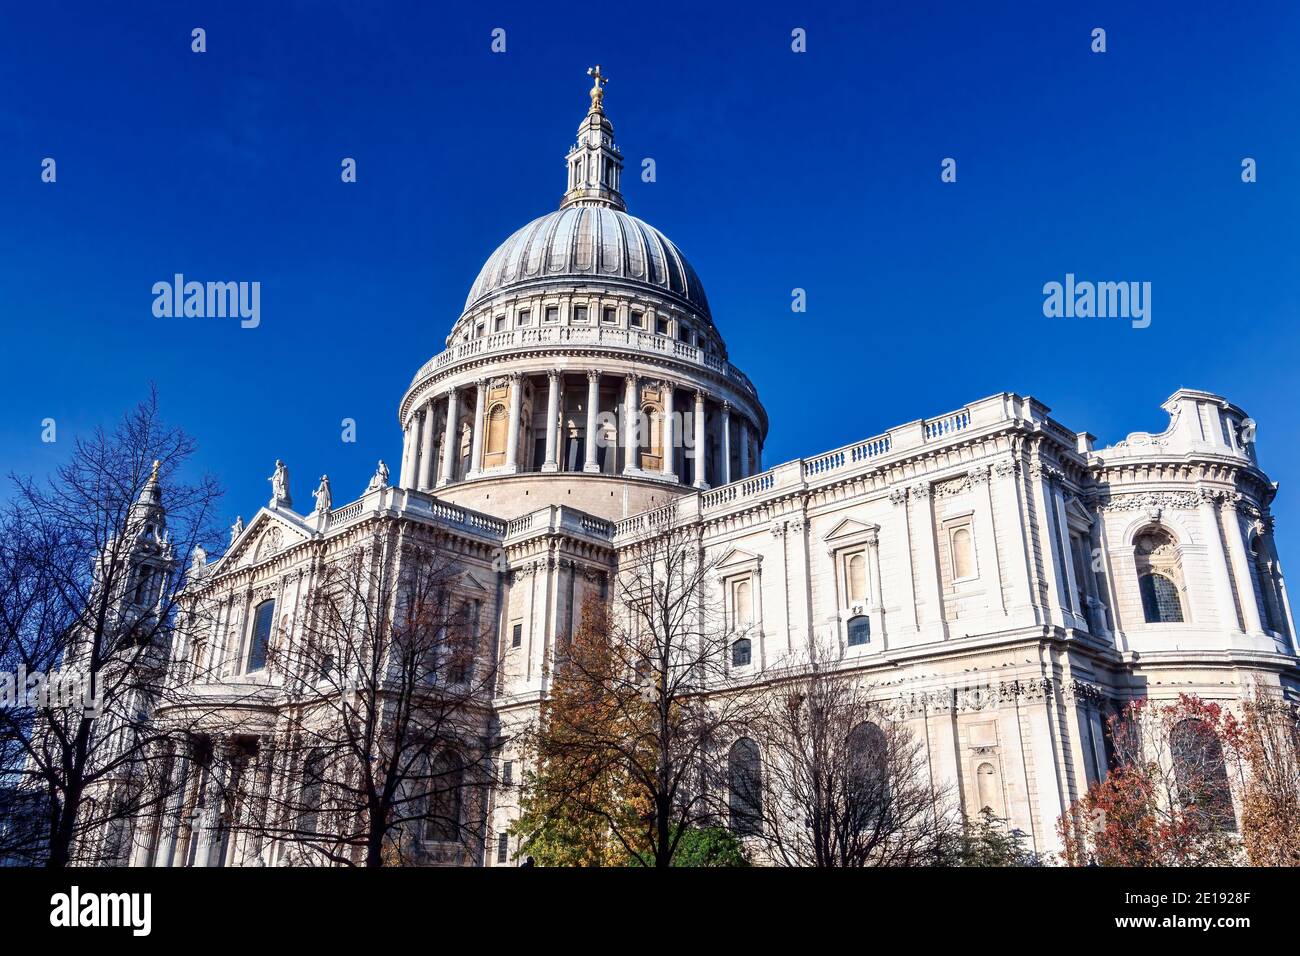 St Paul’s Cathedral  in London England UK built by Sir Christopher Wren which a popular tourism travel destination visitor landmark of the city stock Stock Photo